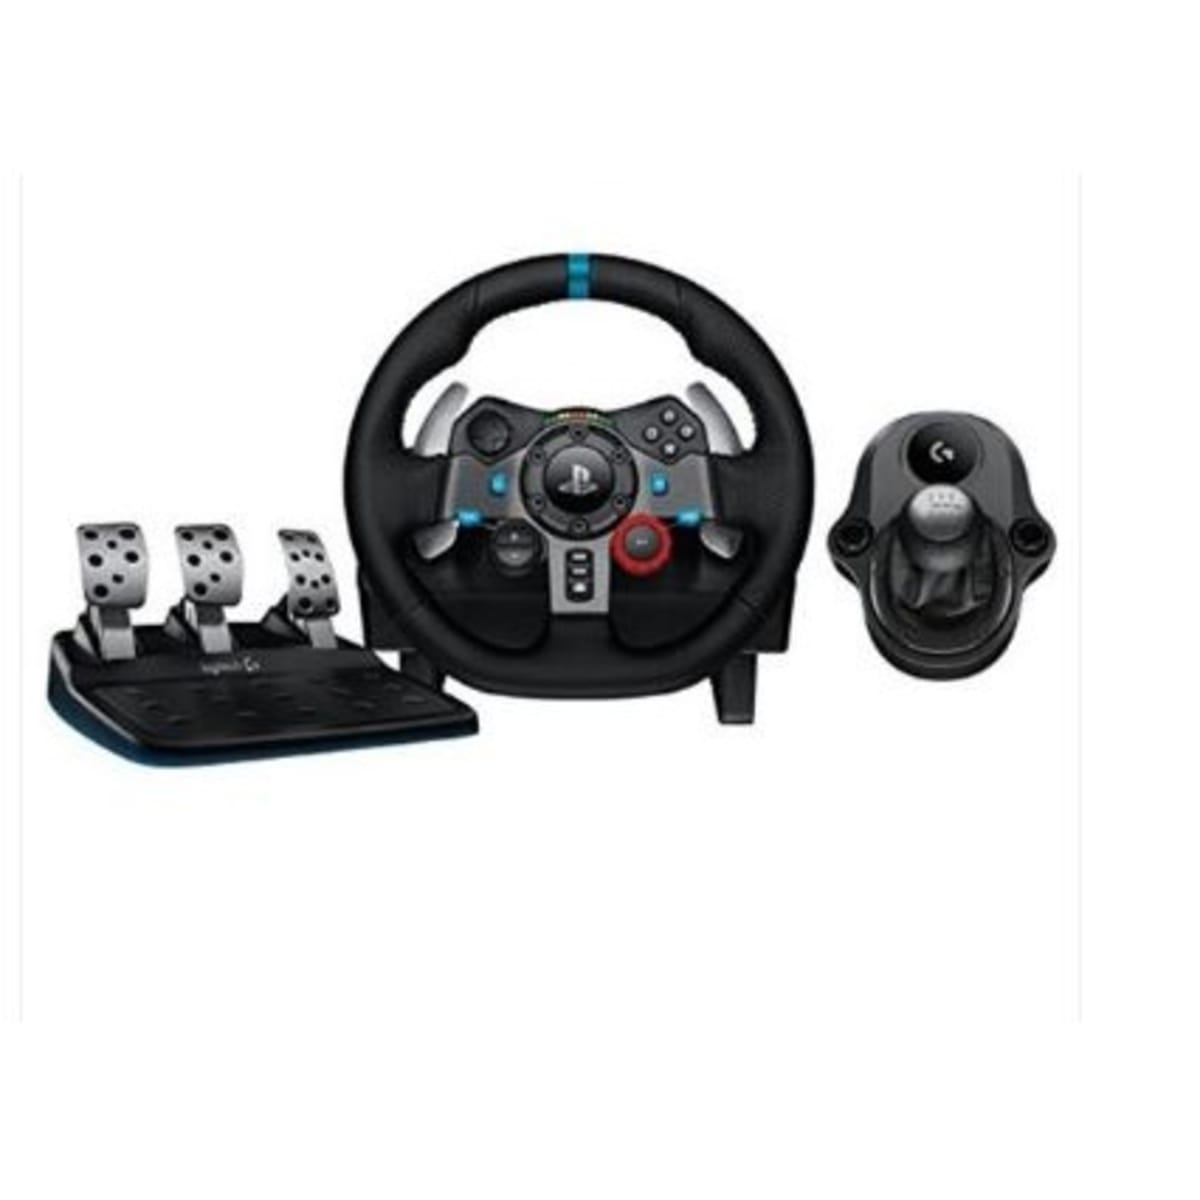 Logitech Driving Force G29 Racing Wheel For PlayStation 3 And PlayStation 4